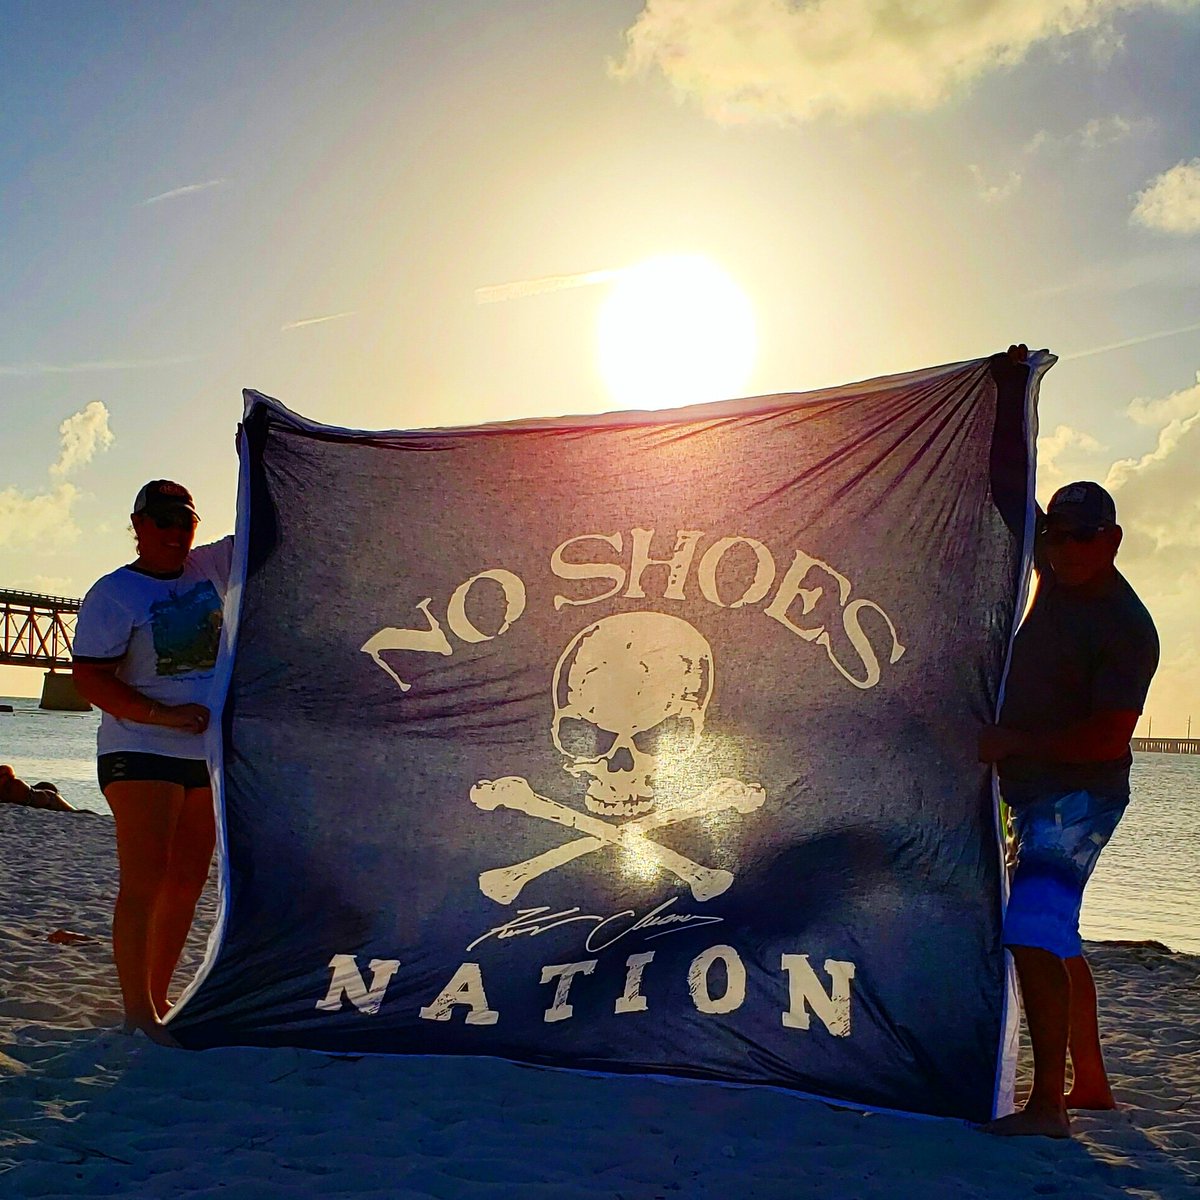 Beach Day in The Florida Keys, representing the #noshoesnation  & @kennychesney #kcpirateflag